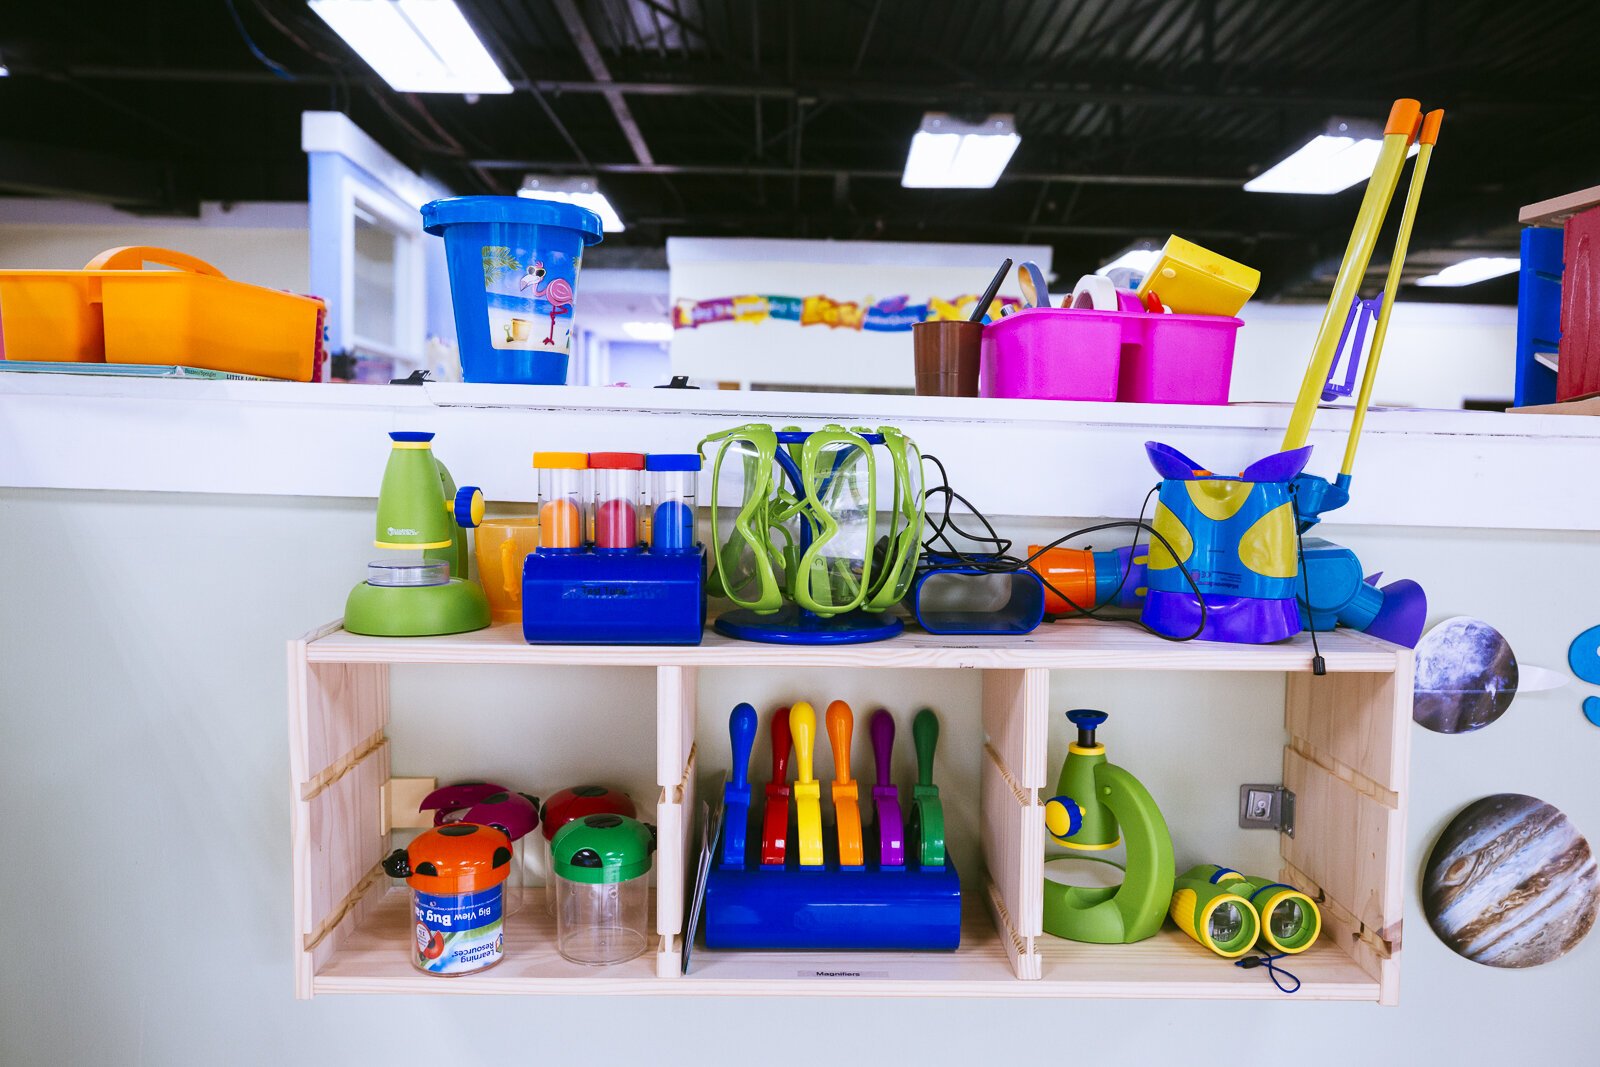 Tools for exploration including microscopes, goggles and collection jars line the shelves of Ready, Set, Grow Learning Academy. The center is STEAM-focused. (Ziggy Mack)